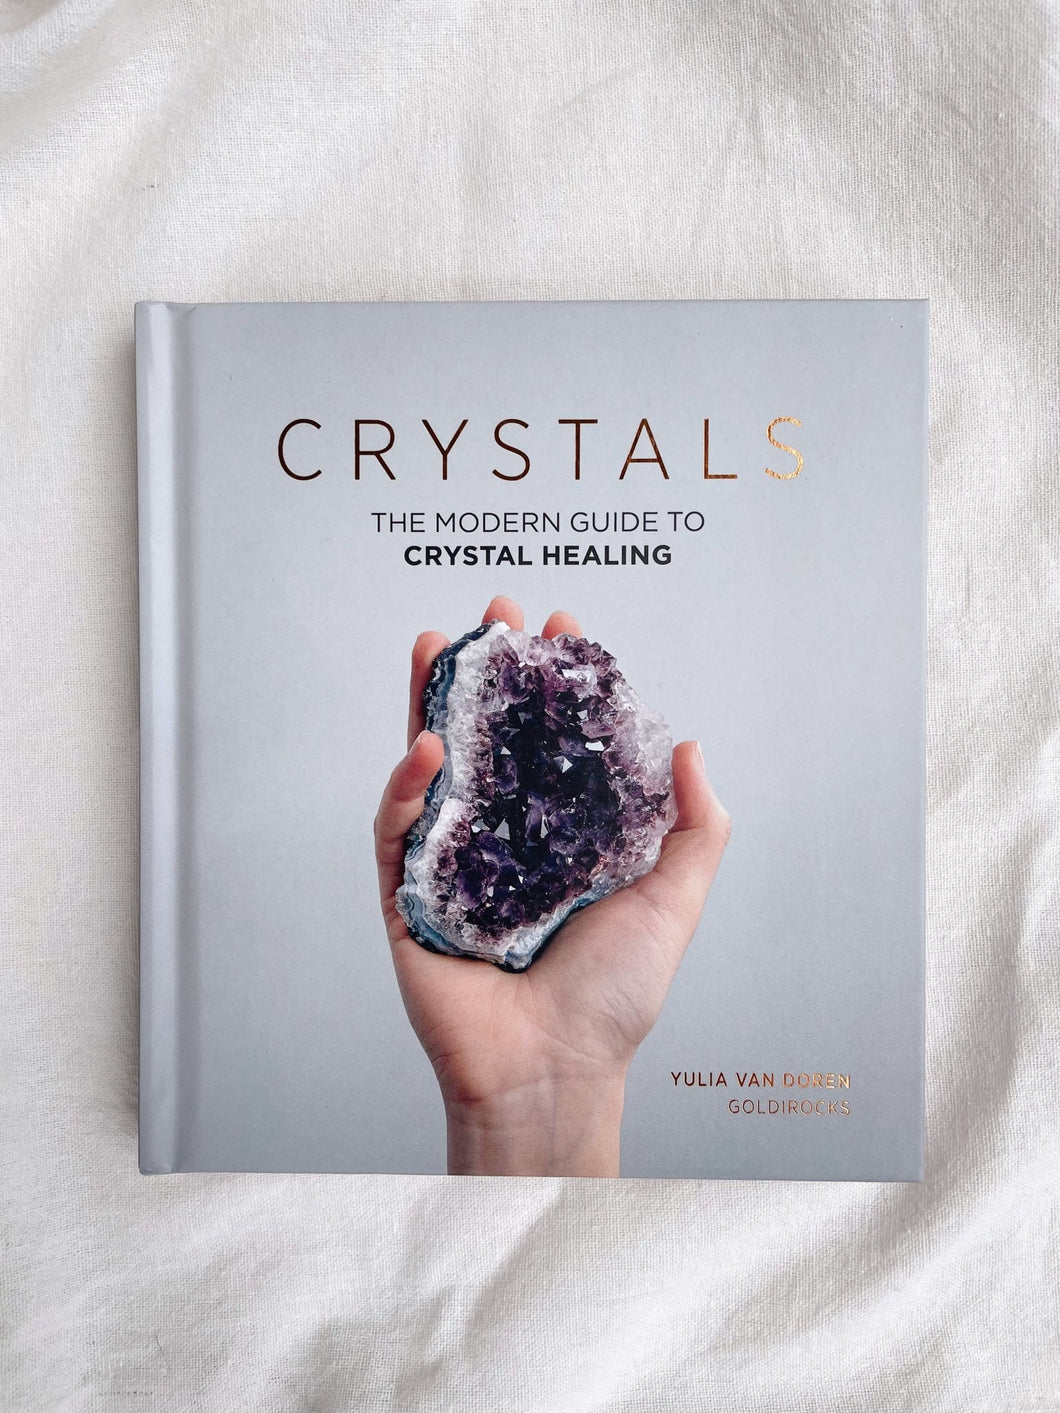 Crystals - The Modern Guide to Crystal Healing by Yulia Van Doren - Little Quartz Co Crystals